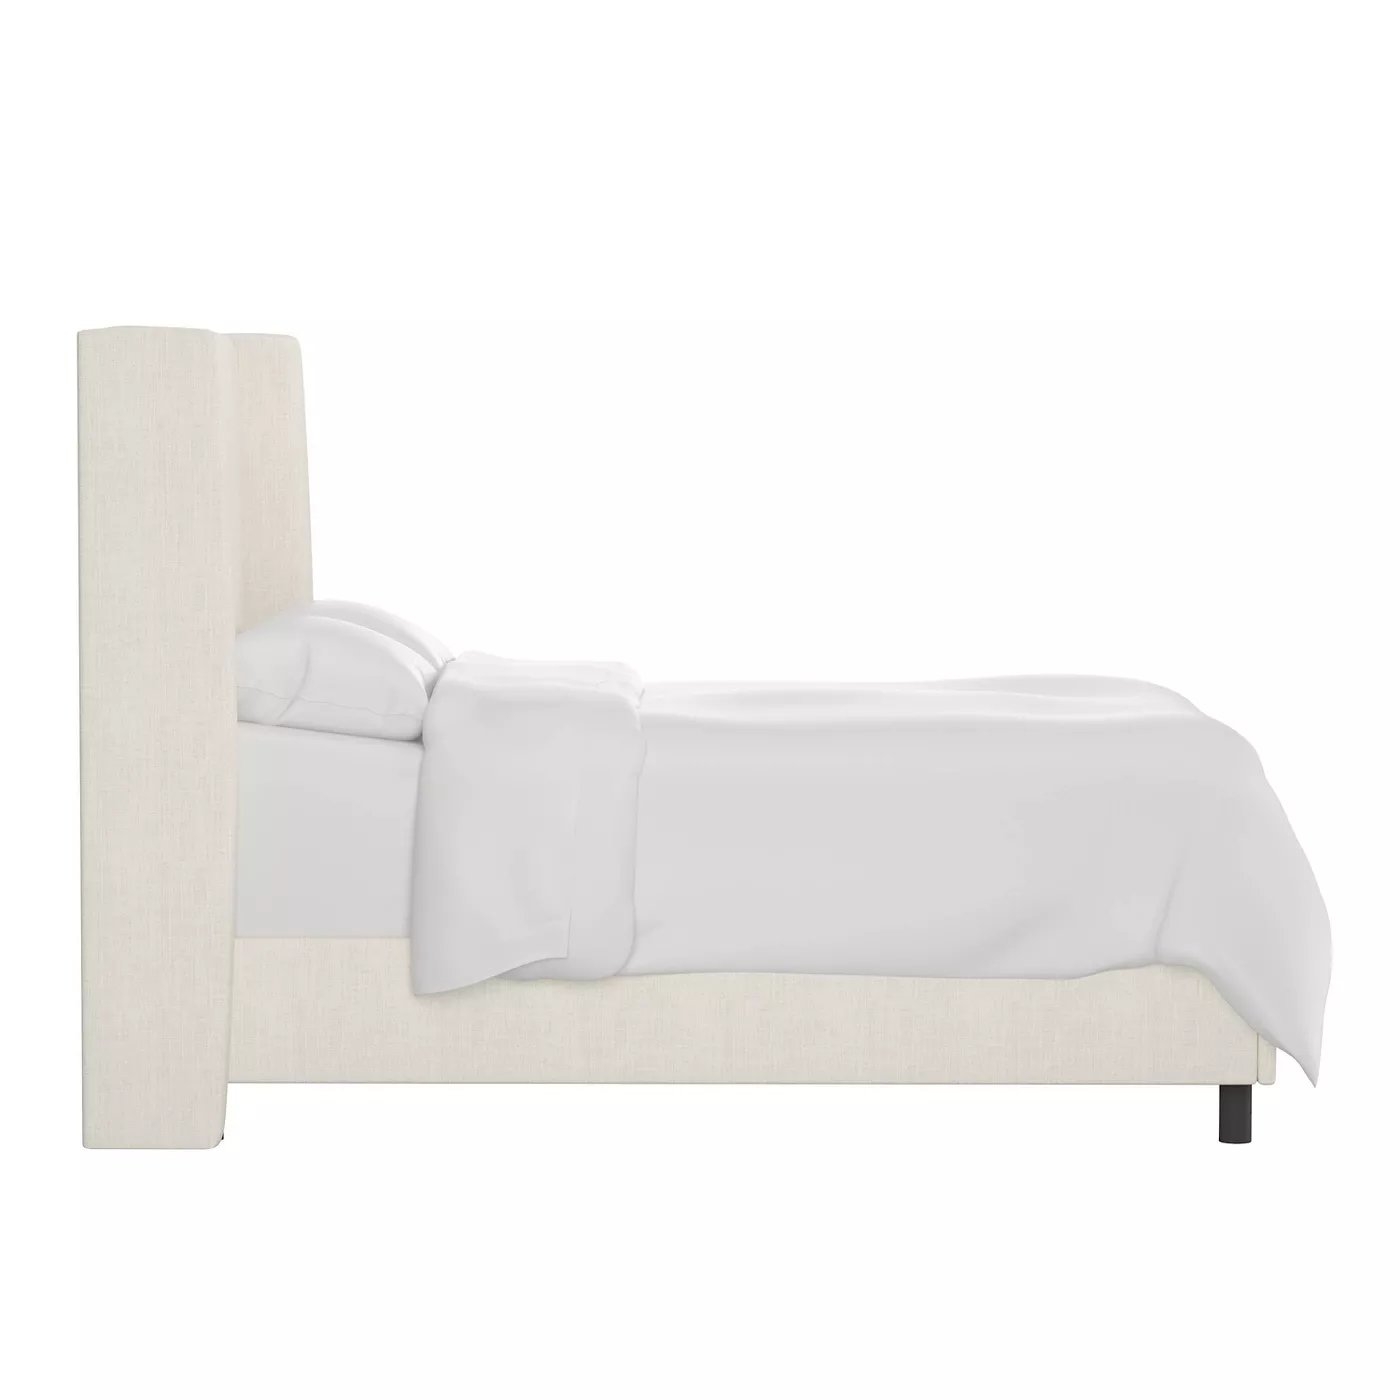 Amera Upholstered Low Profile Standard Bed Queen size - Image 1